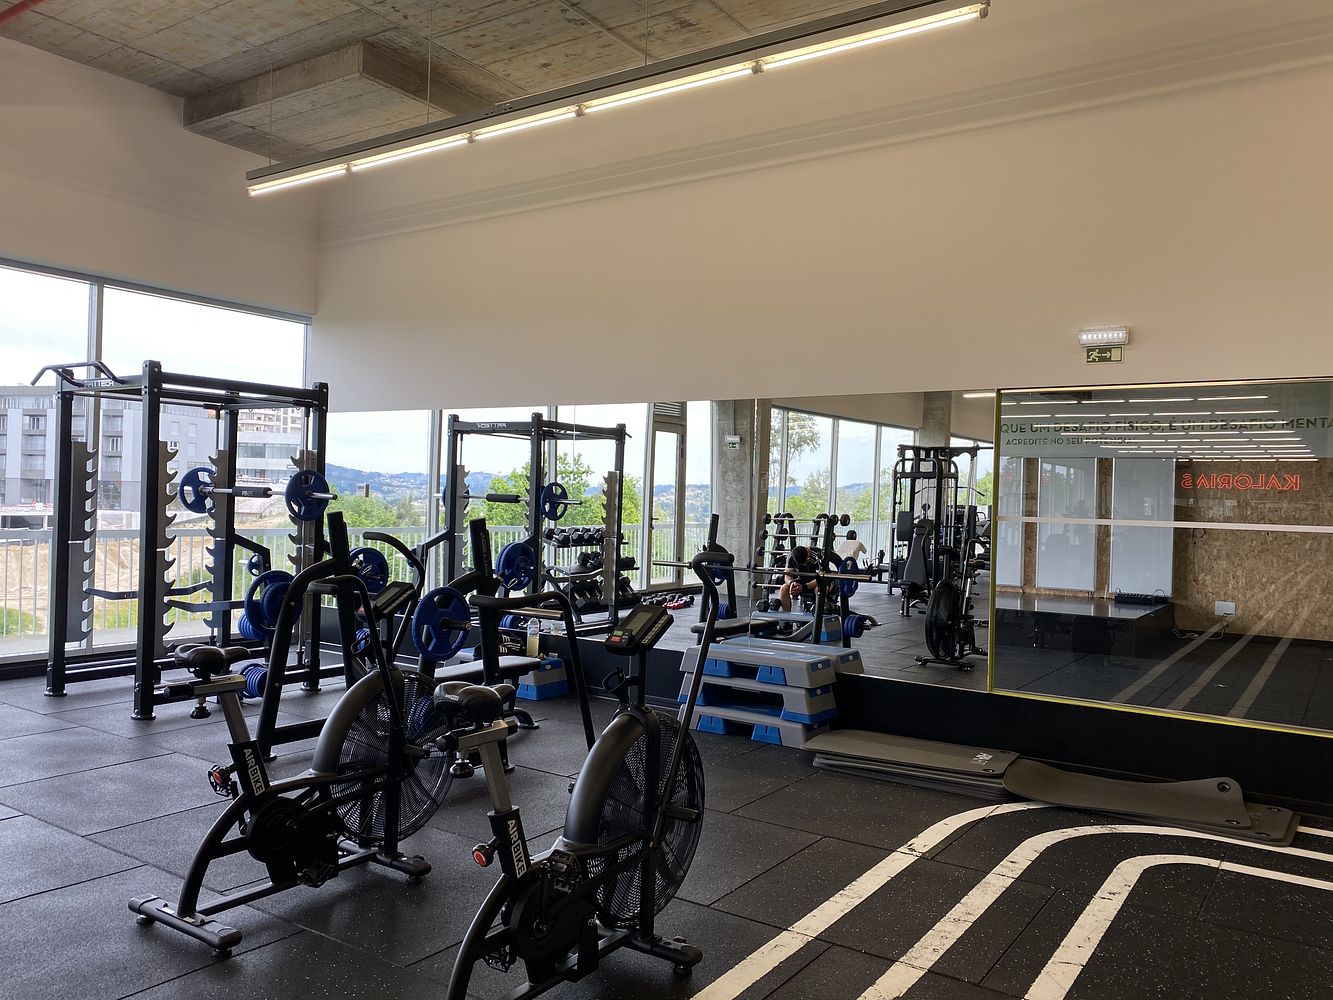 Kalorias Marco de Canaveses gym in Marco De Canaveses, Portugal